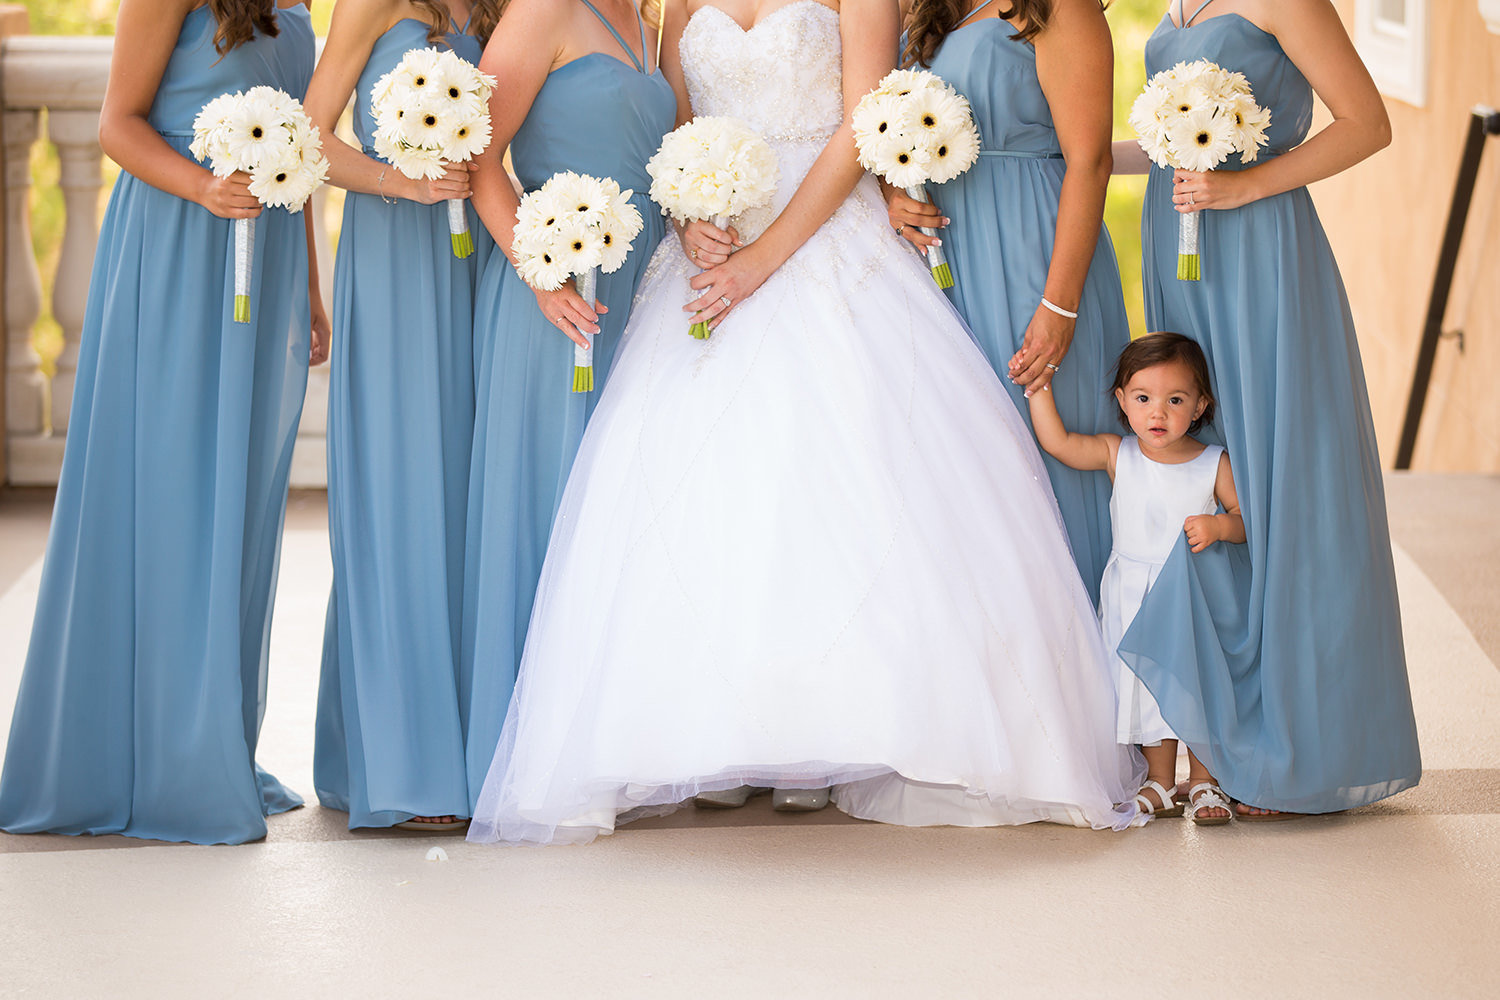 bridesmaids with blue dressed and white flowers